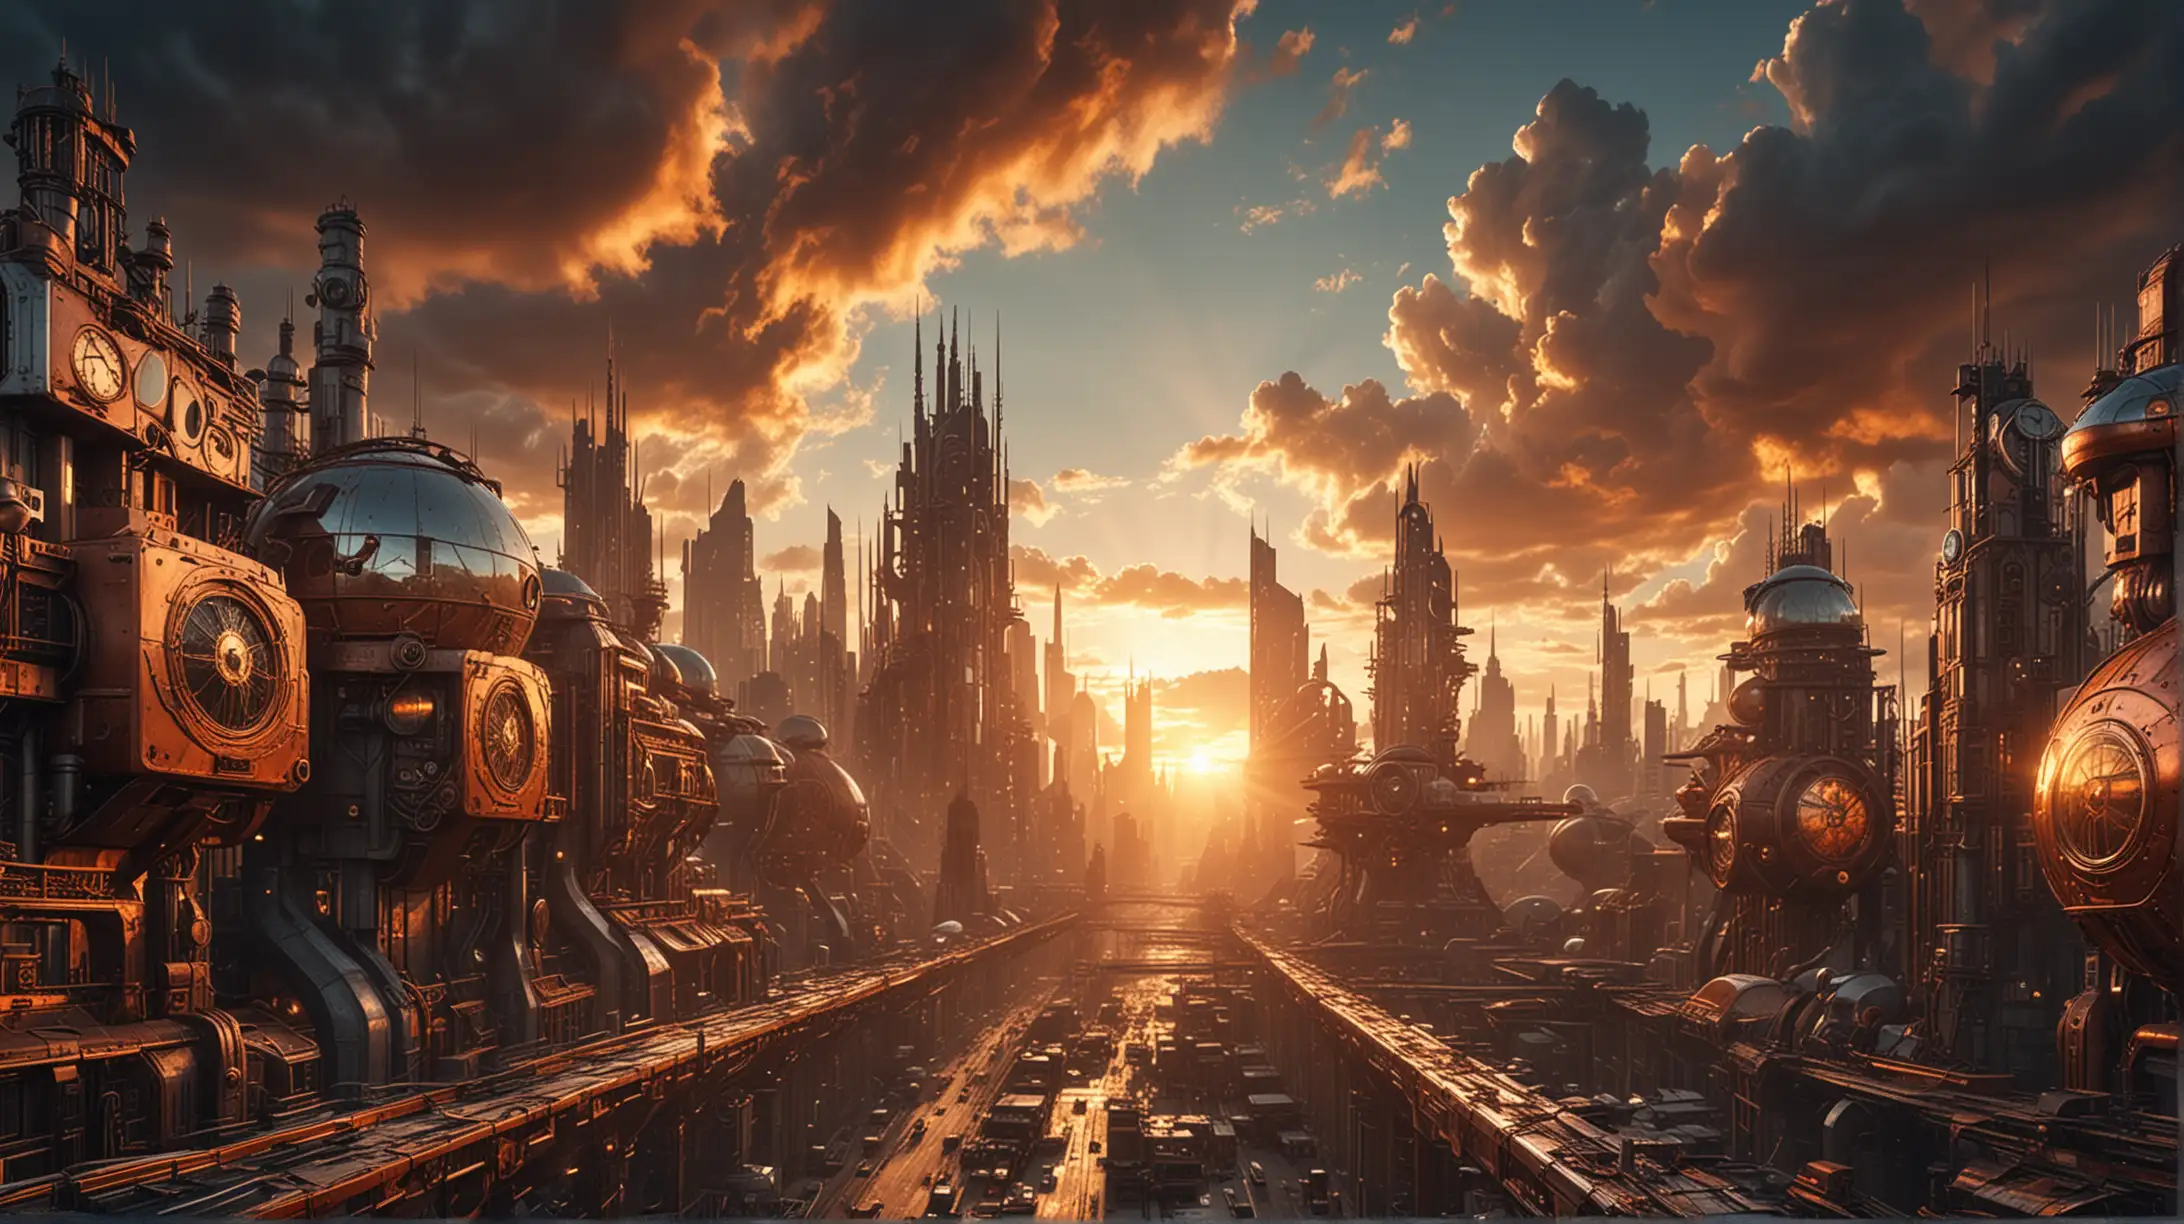 the sunrise over a futuristic city with buildings in the steampunk style, backlit clouds, aluminum, steel, copper, glass